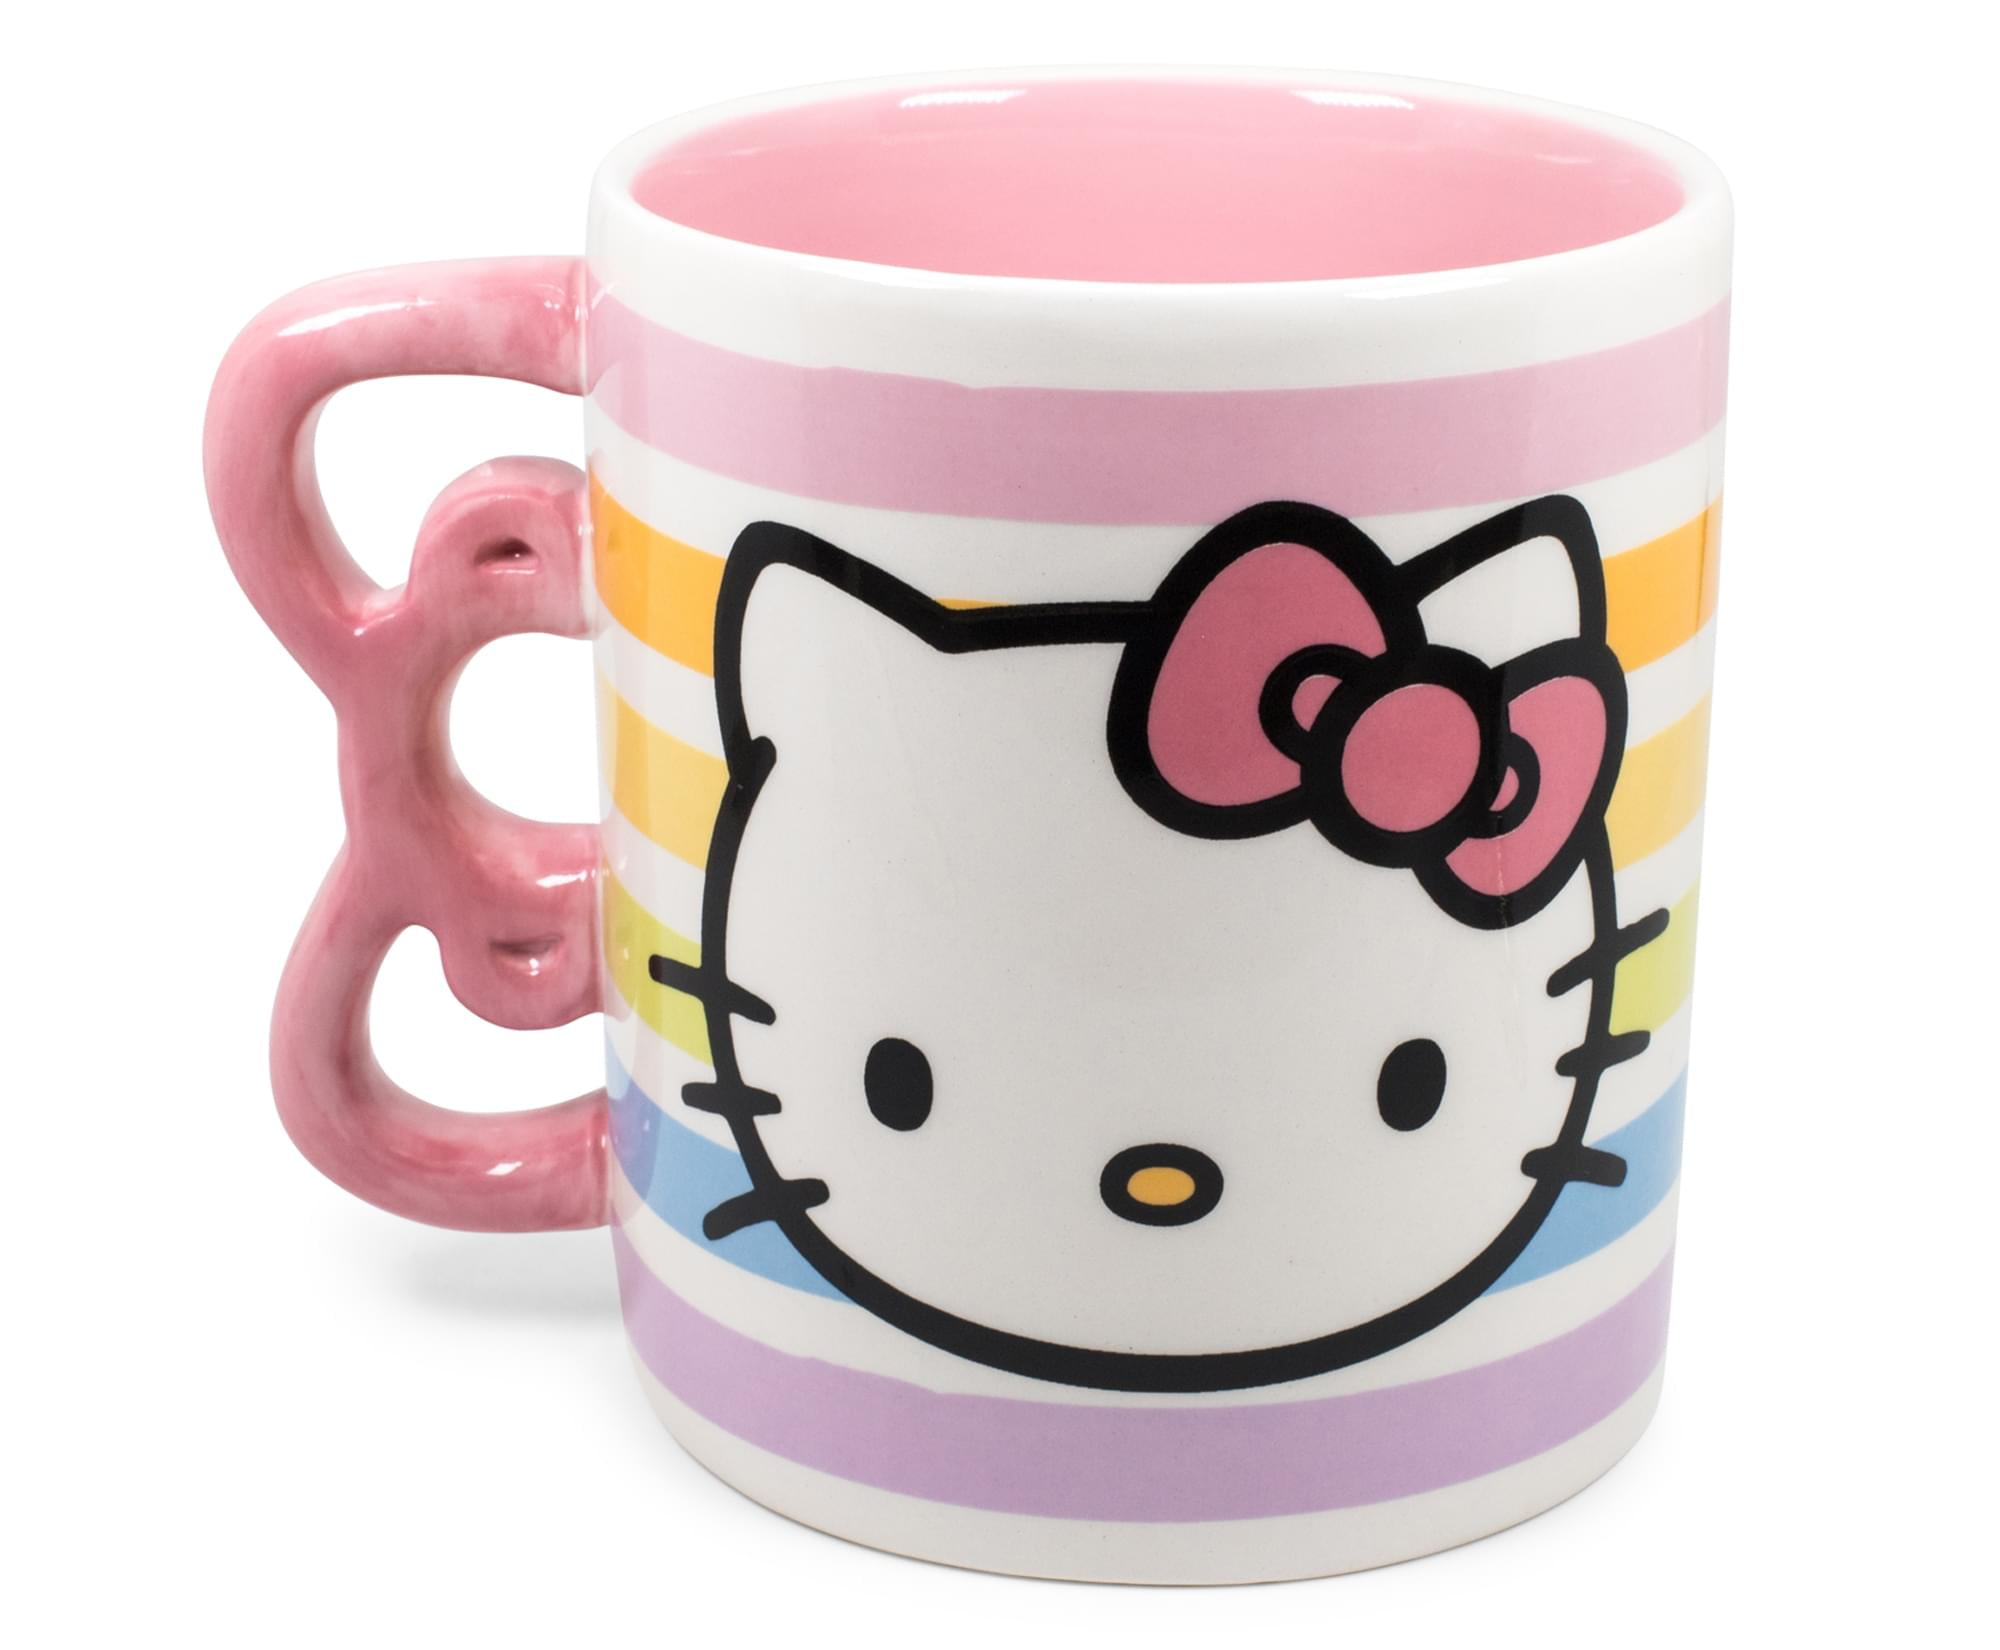 Sanrio Hello Kitty Cold/Hot Drink Travel Mug Red Or Pink Or Purple 17 fl oz size 